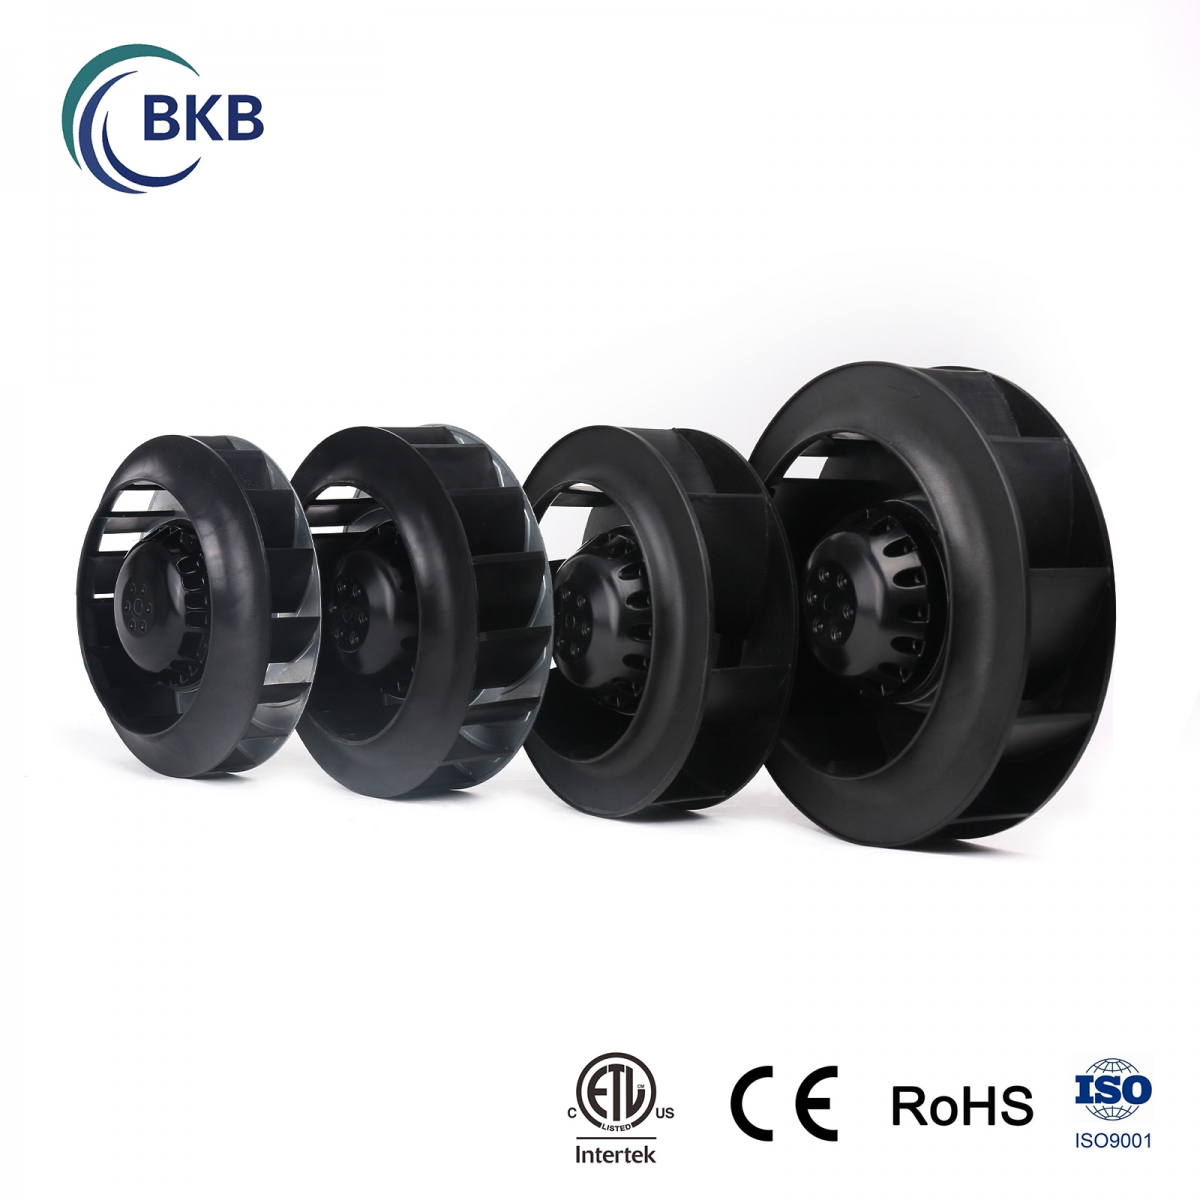 ETL APPROVED Plastic backward curved centrifugal fan φ 180H50 SUPPLIER AND FACTORY IN CHINA .-SUNLIGHT BLOWER,Centrifugal Fans, Inline Fans,Motors,Backward curved centrifugal fans ,Forward curved centrifugal fans ,inlet fans, EC fans